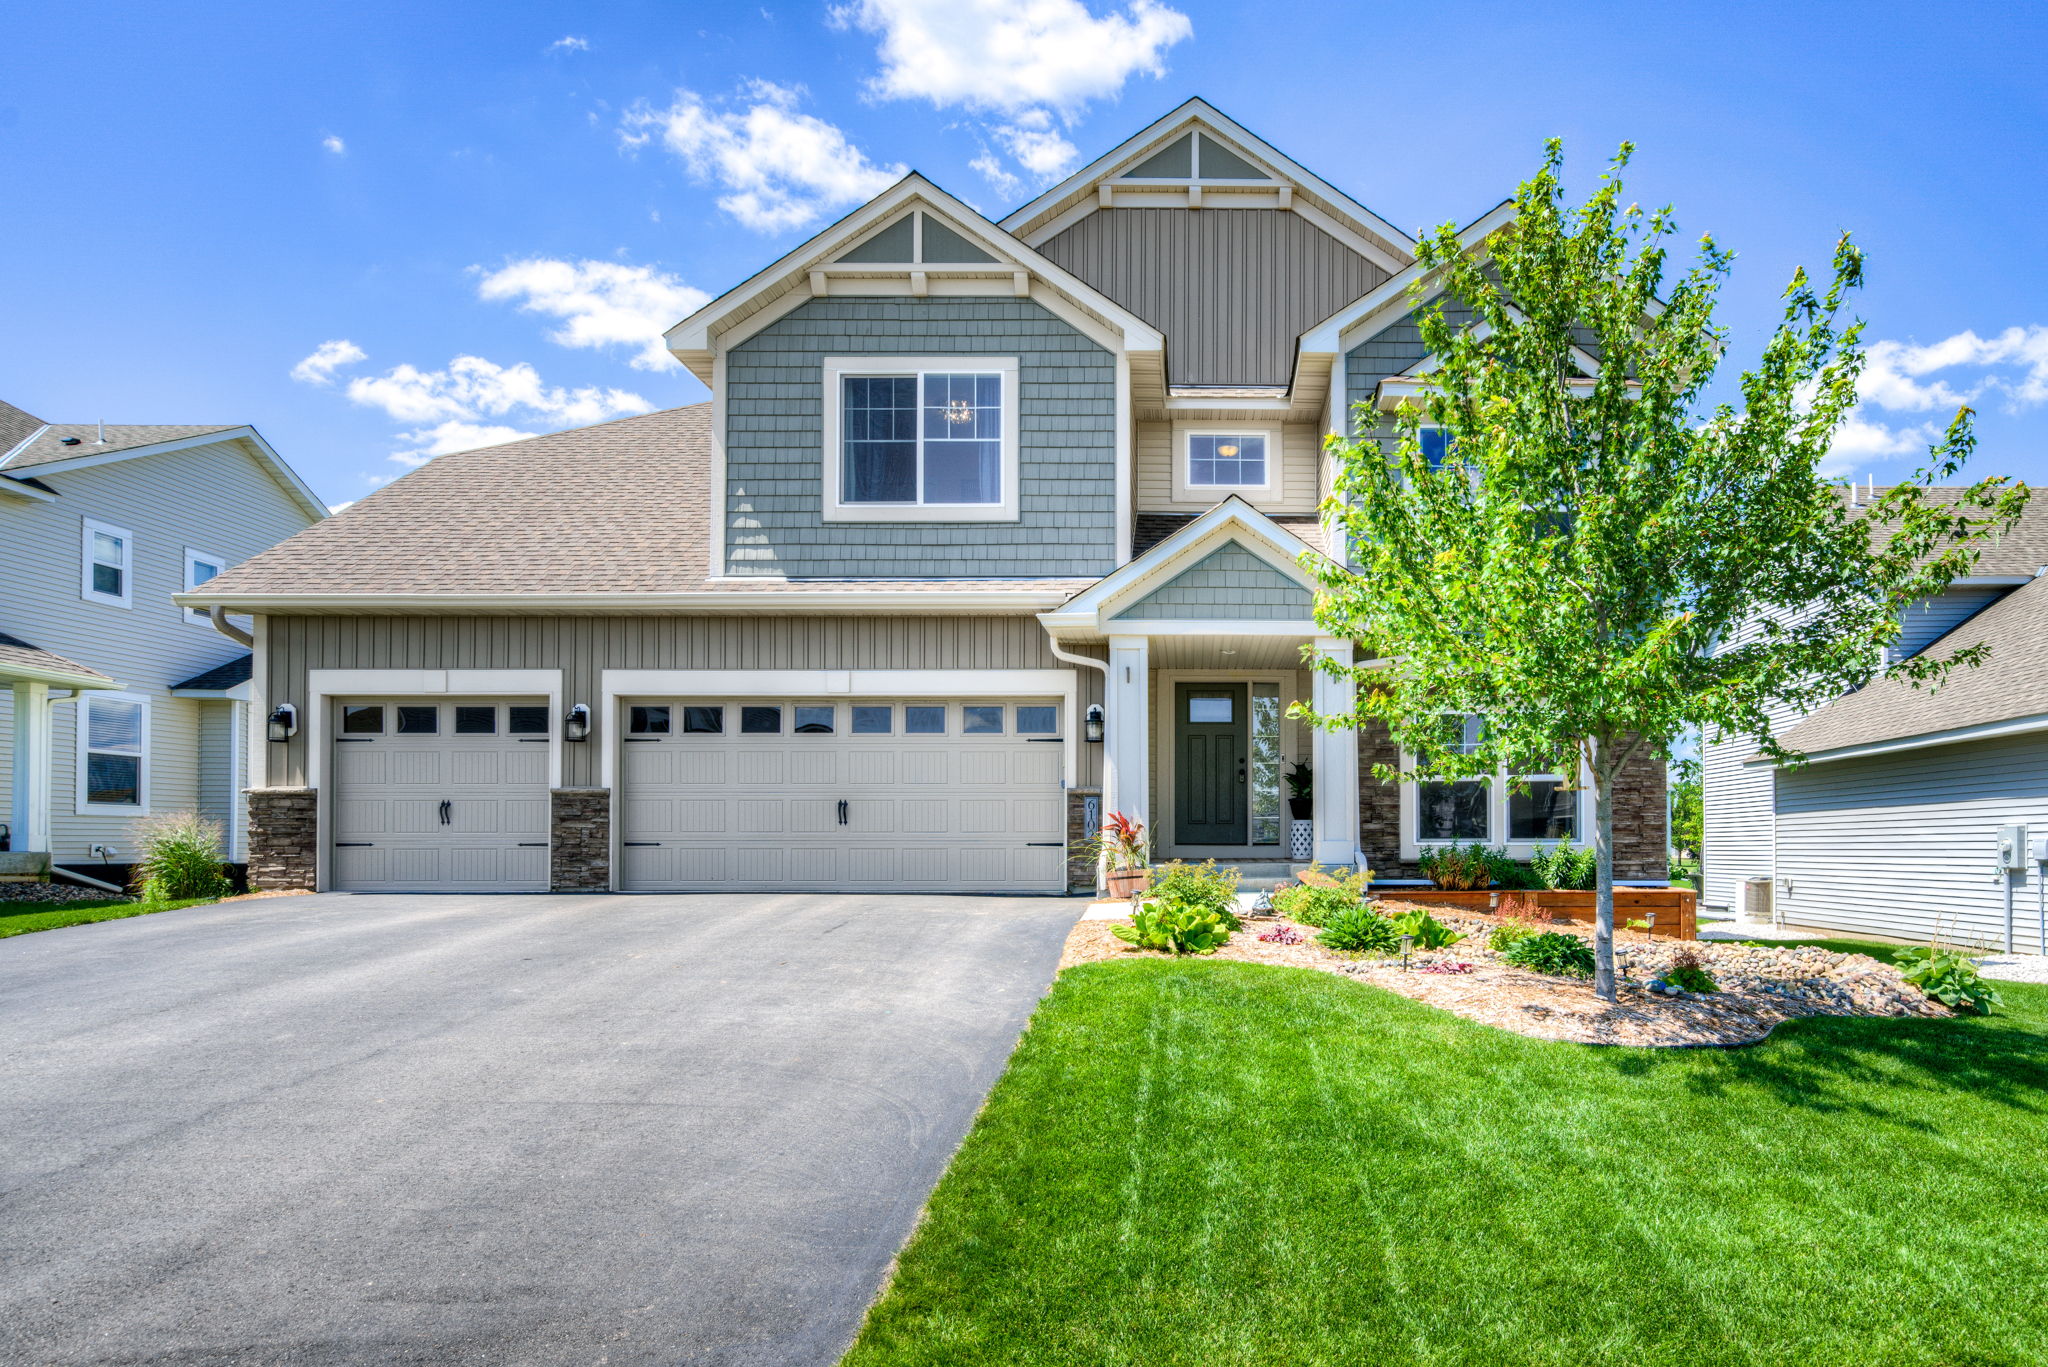  6102 158th Street West, Apple Valley, MN 55124, US